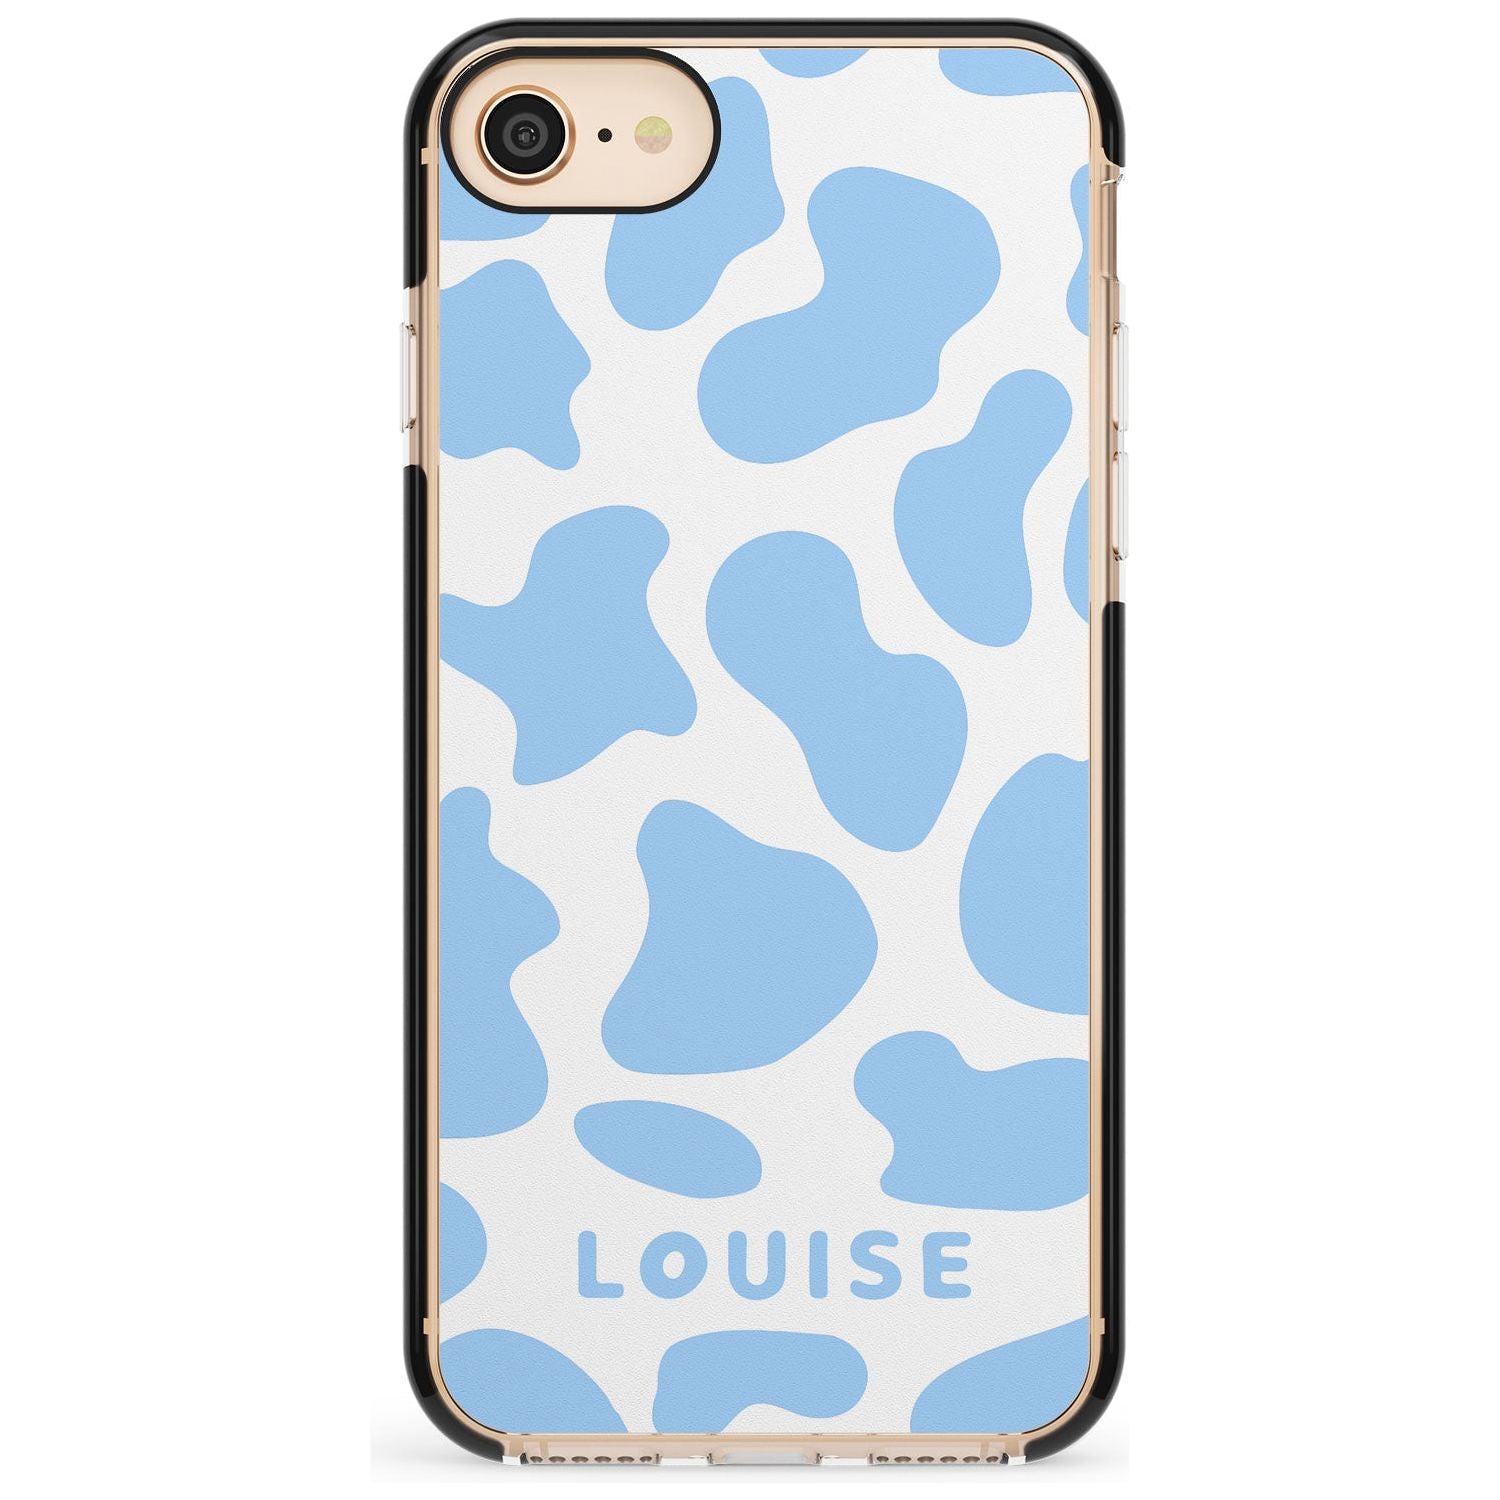 Personalised Blue and White Cow Print Black Impact Phone Case for iPhone SE 8 7 Plus